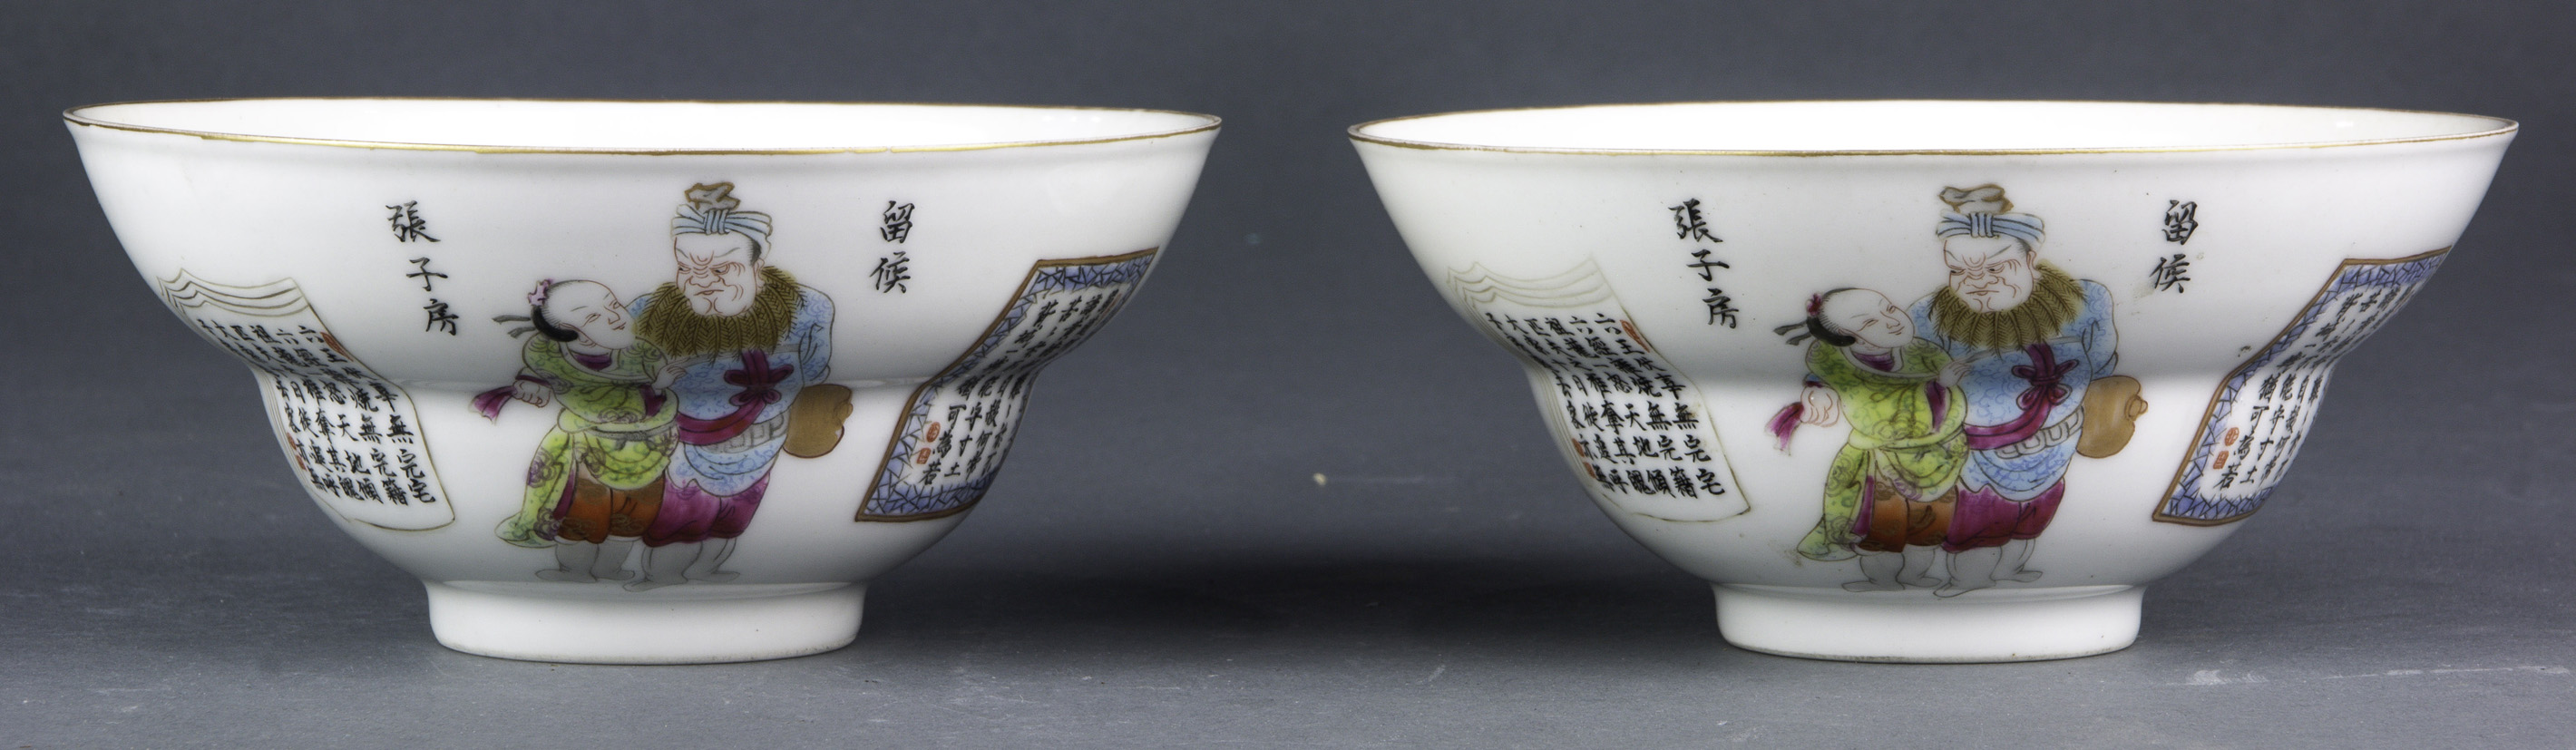 PAIR OF CHINESE FAMILLE ROSE BOWLS